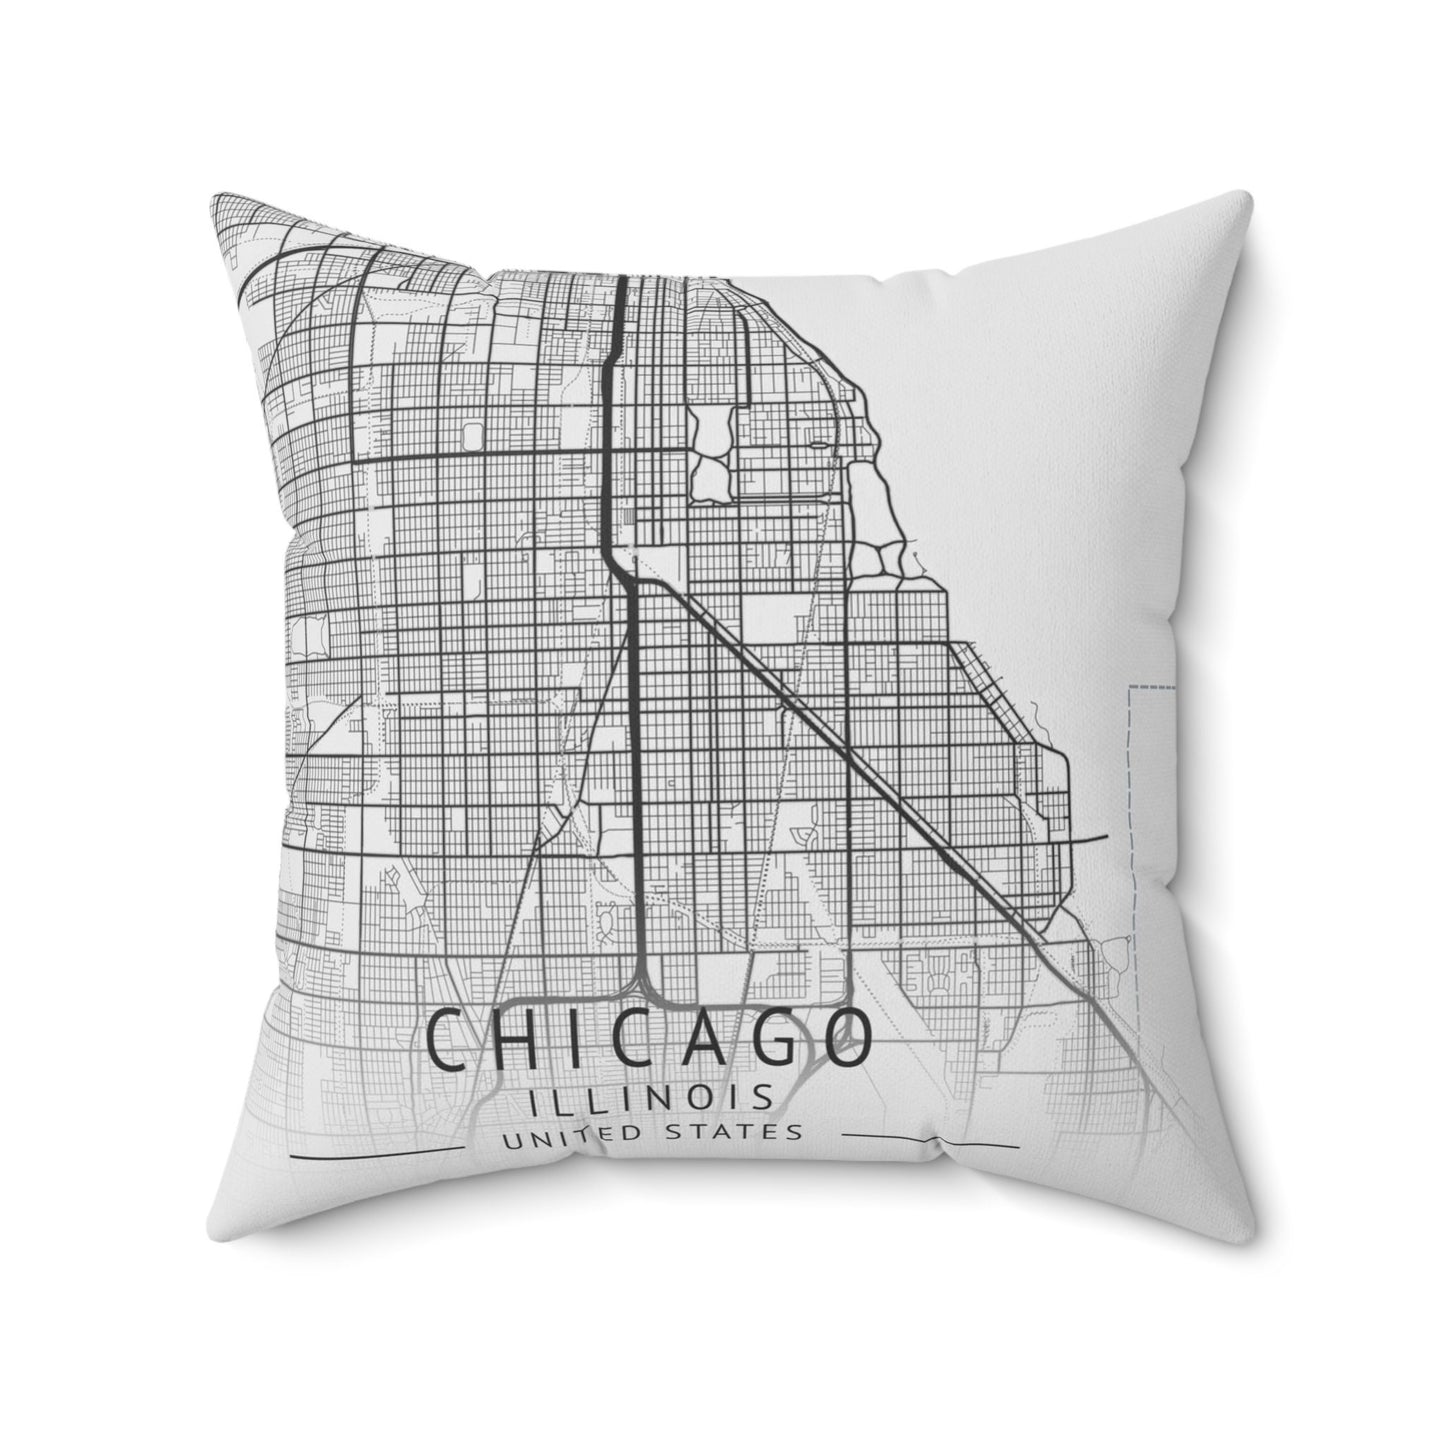 Elevate Your Room Décor with a Striking Large Chicago City Map Print on a plush Spun Polyester Square Pillow